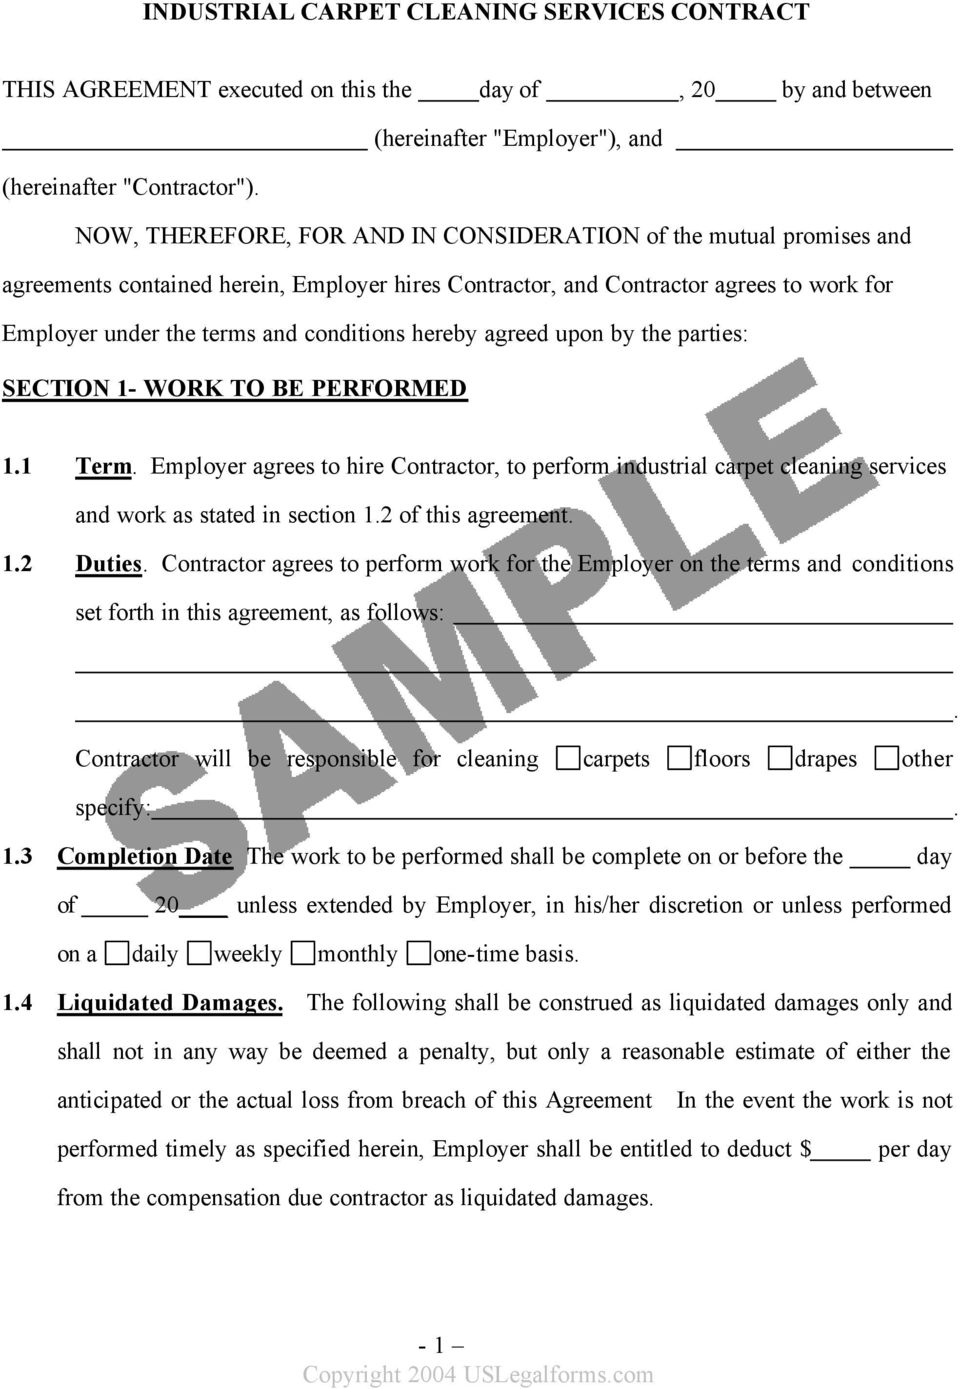 parties: SECTION 1- WORK TO BE PERFORMED 11 Term Employer agrees to hire Contractor, to perform industrial carpet cleaning services and work as stated in section 12 of this agreement 12 Duties